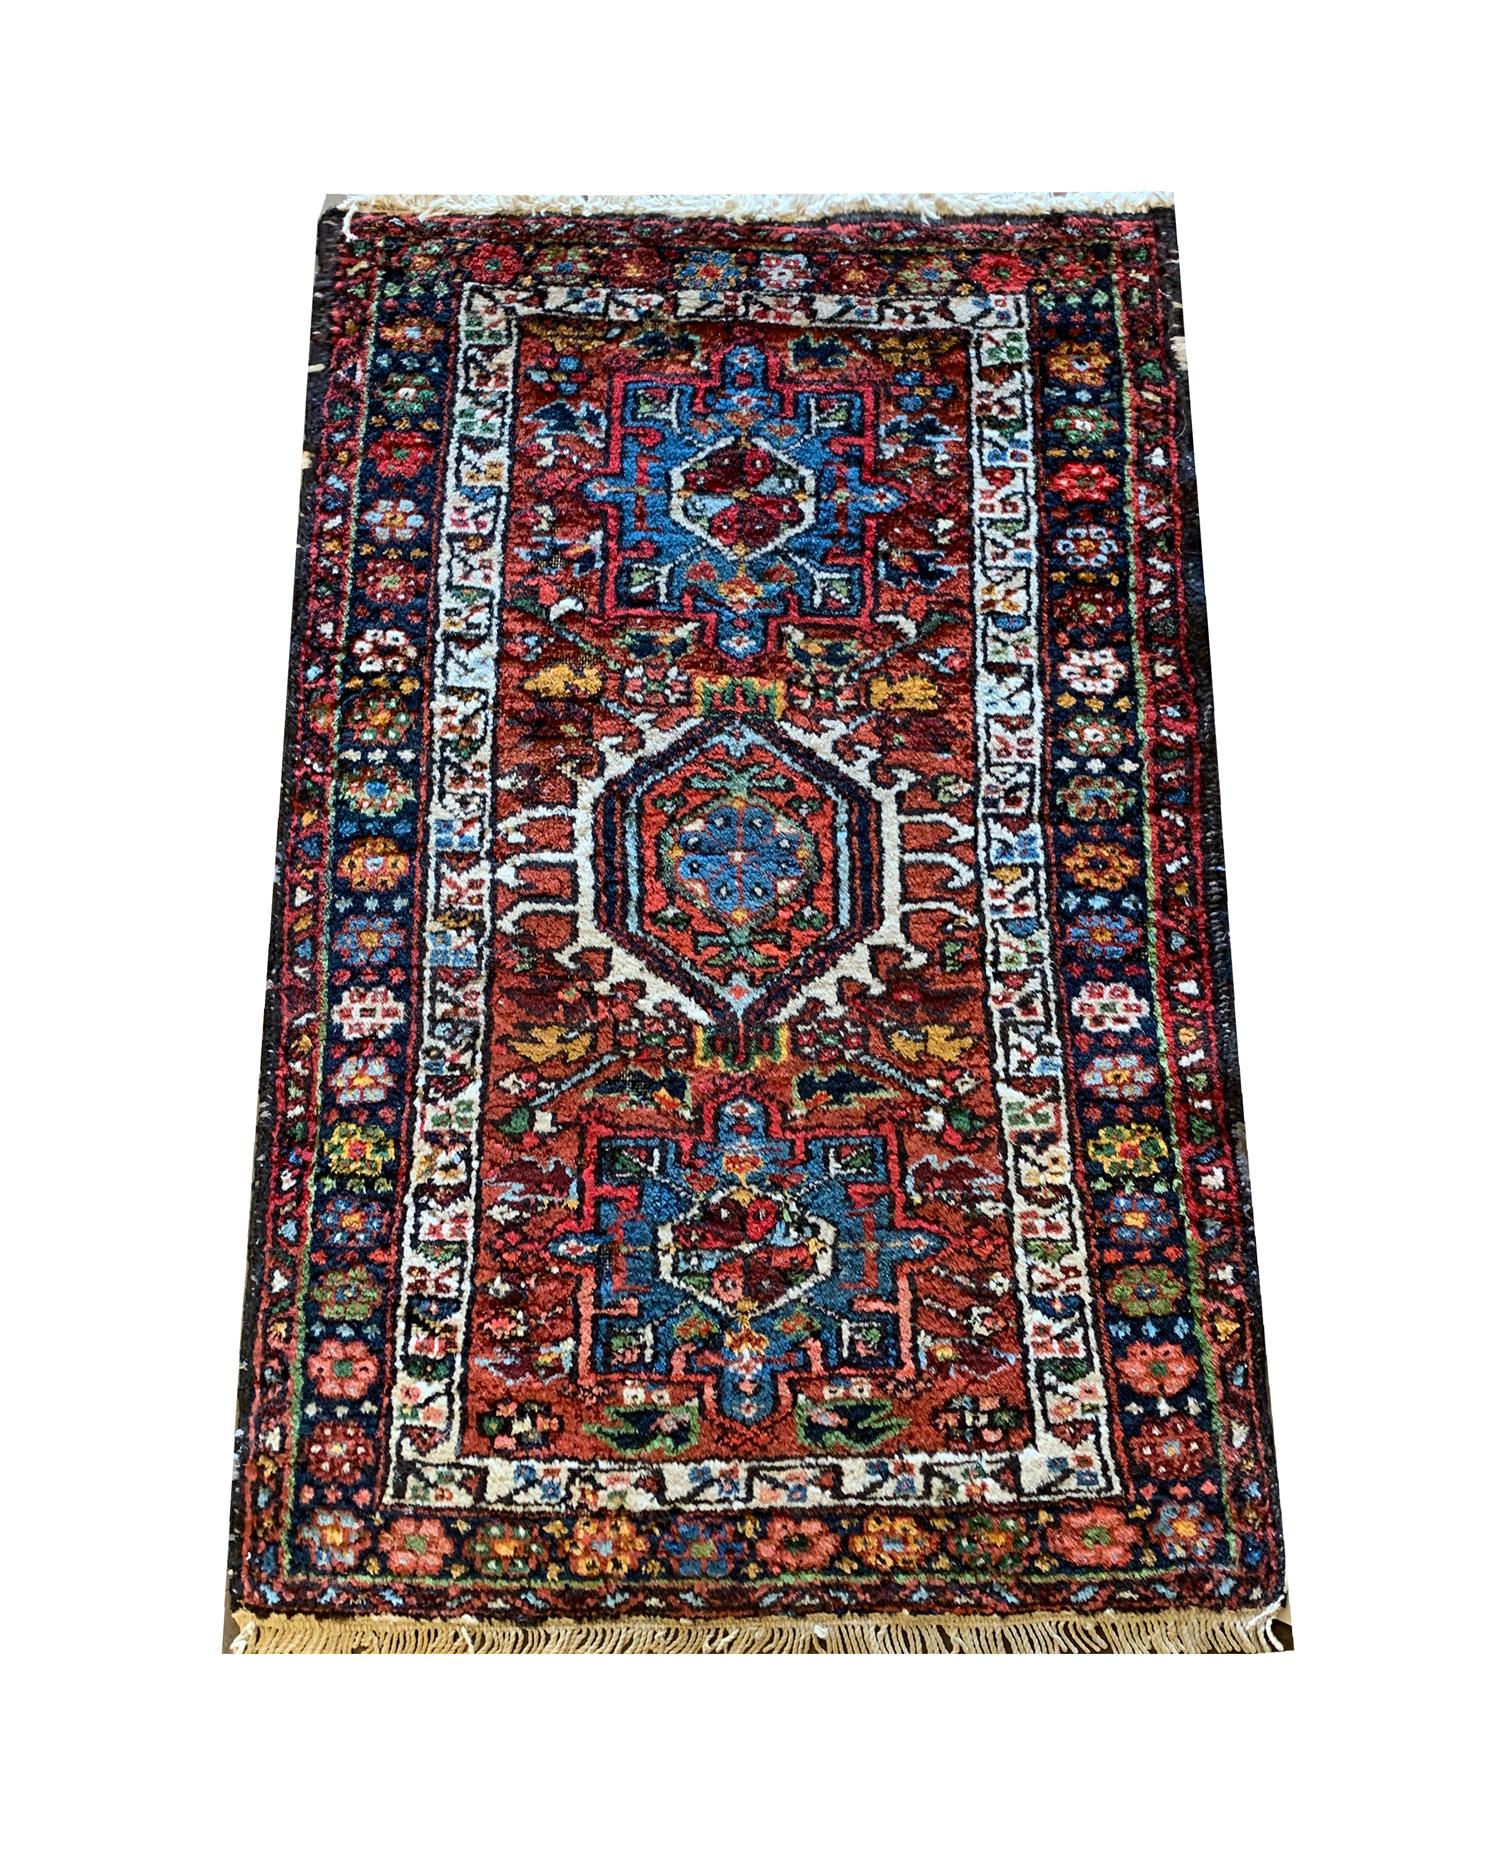 This unique small handwoven Caucasian wool rug has been constructed with three highly-decorative tribal medallions on a rich red-brown background with accents of cream, blue, yellow and green. Both the color and design of this piece make it the